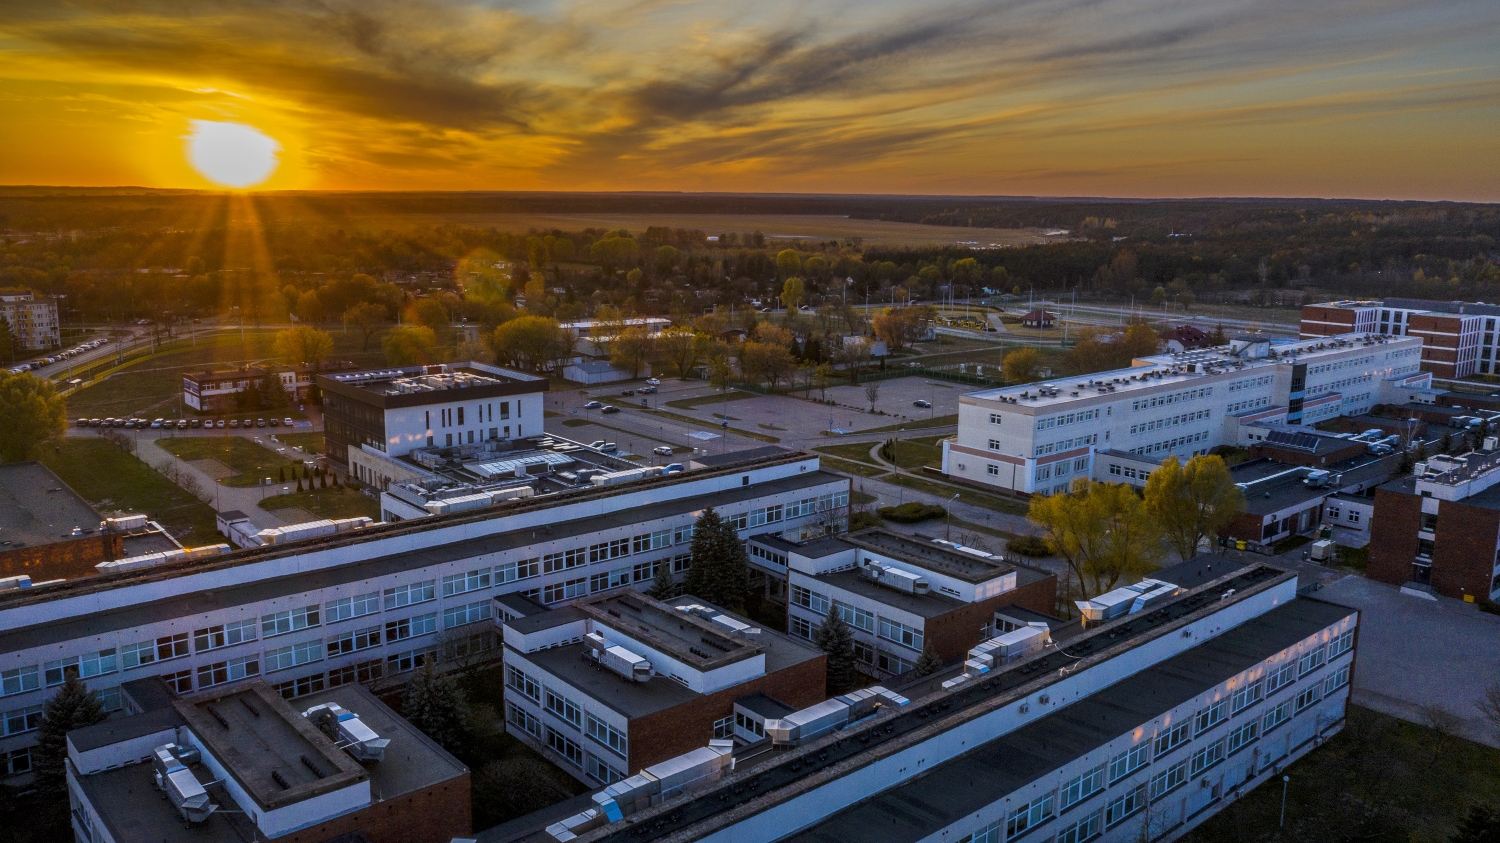 Bird’s eye view of the Faculty of Chemistry at sunset